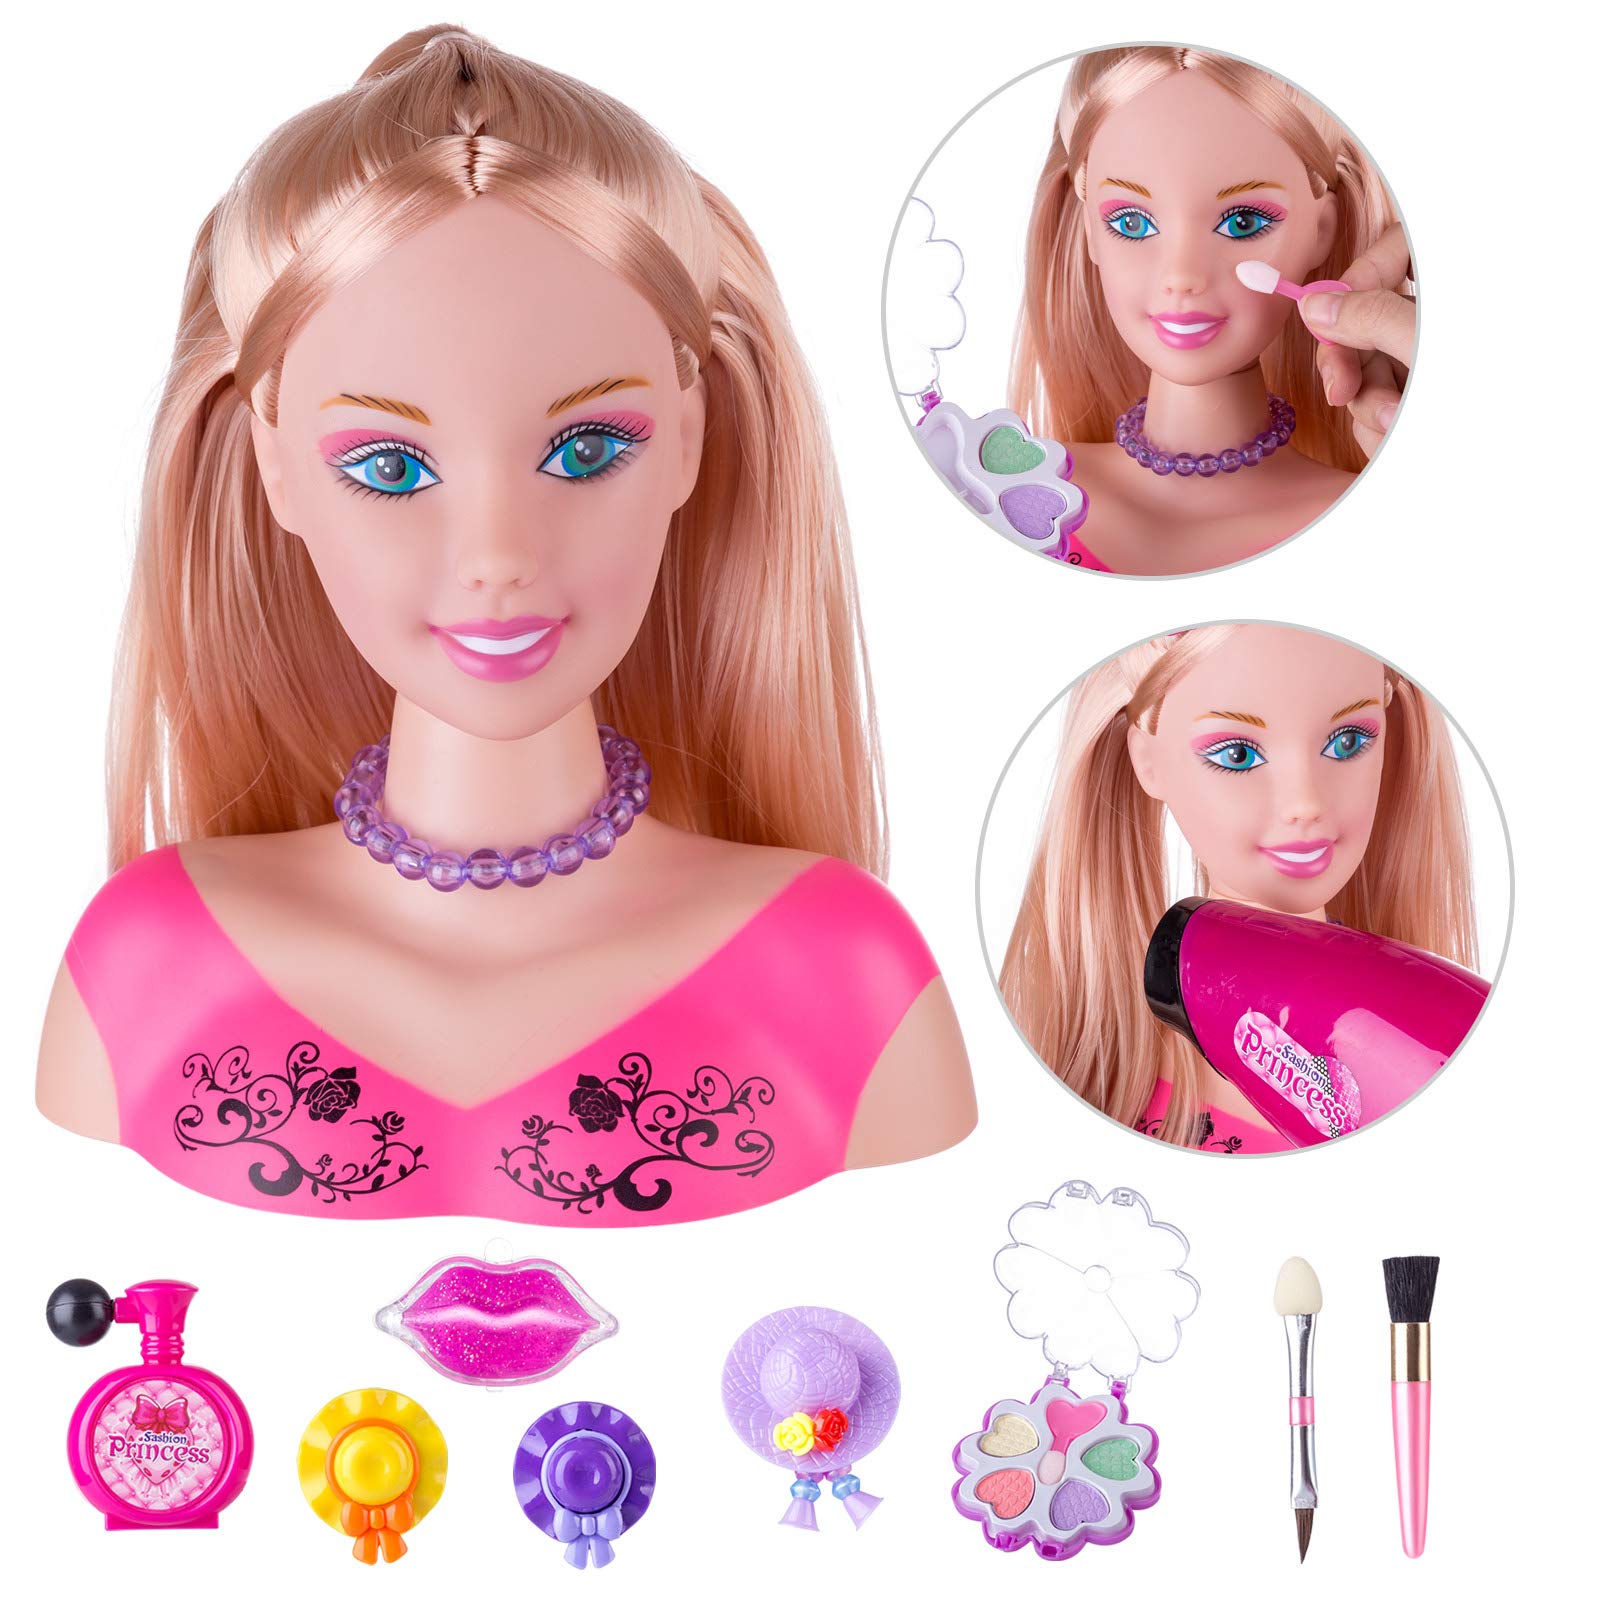 Mua KonHaovF Doll Head for Hair Styling and Make Up for Little Girls, Small Styling  Head Doll with Hair Accessories for Girls Makeup Practice, Doll Makeup Head  Toys for Girls with Hair